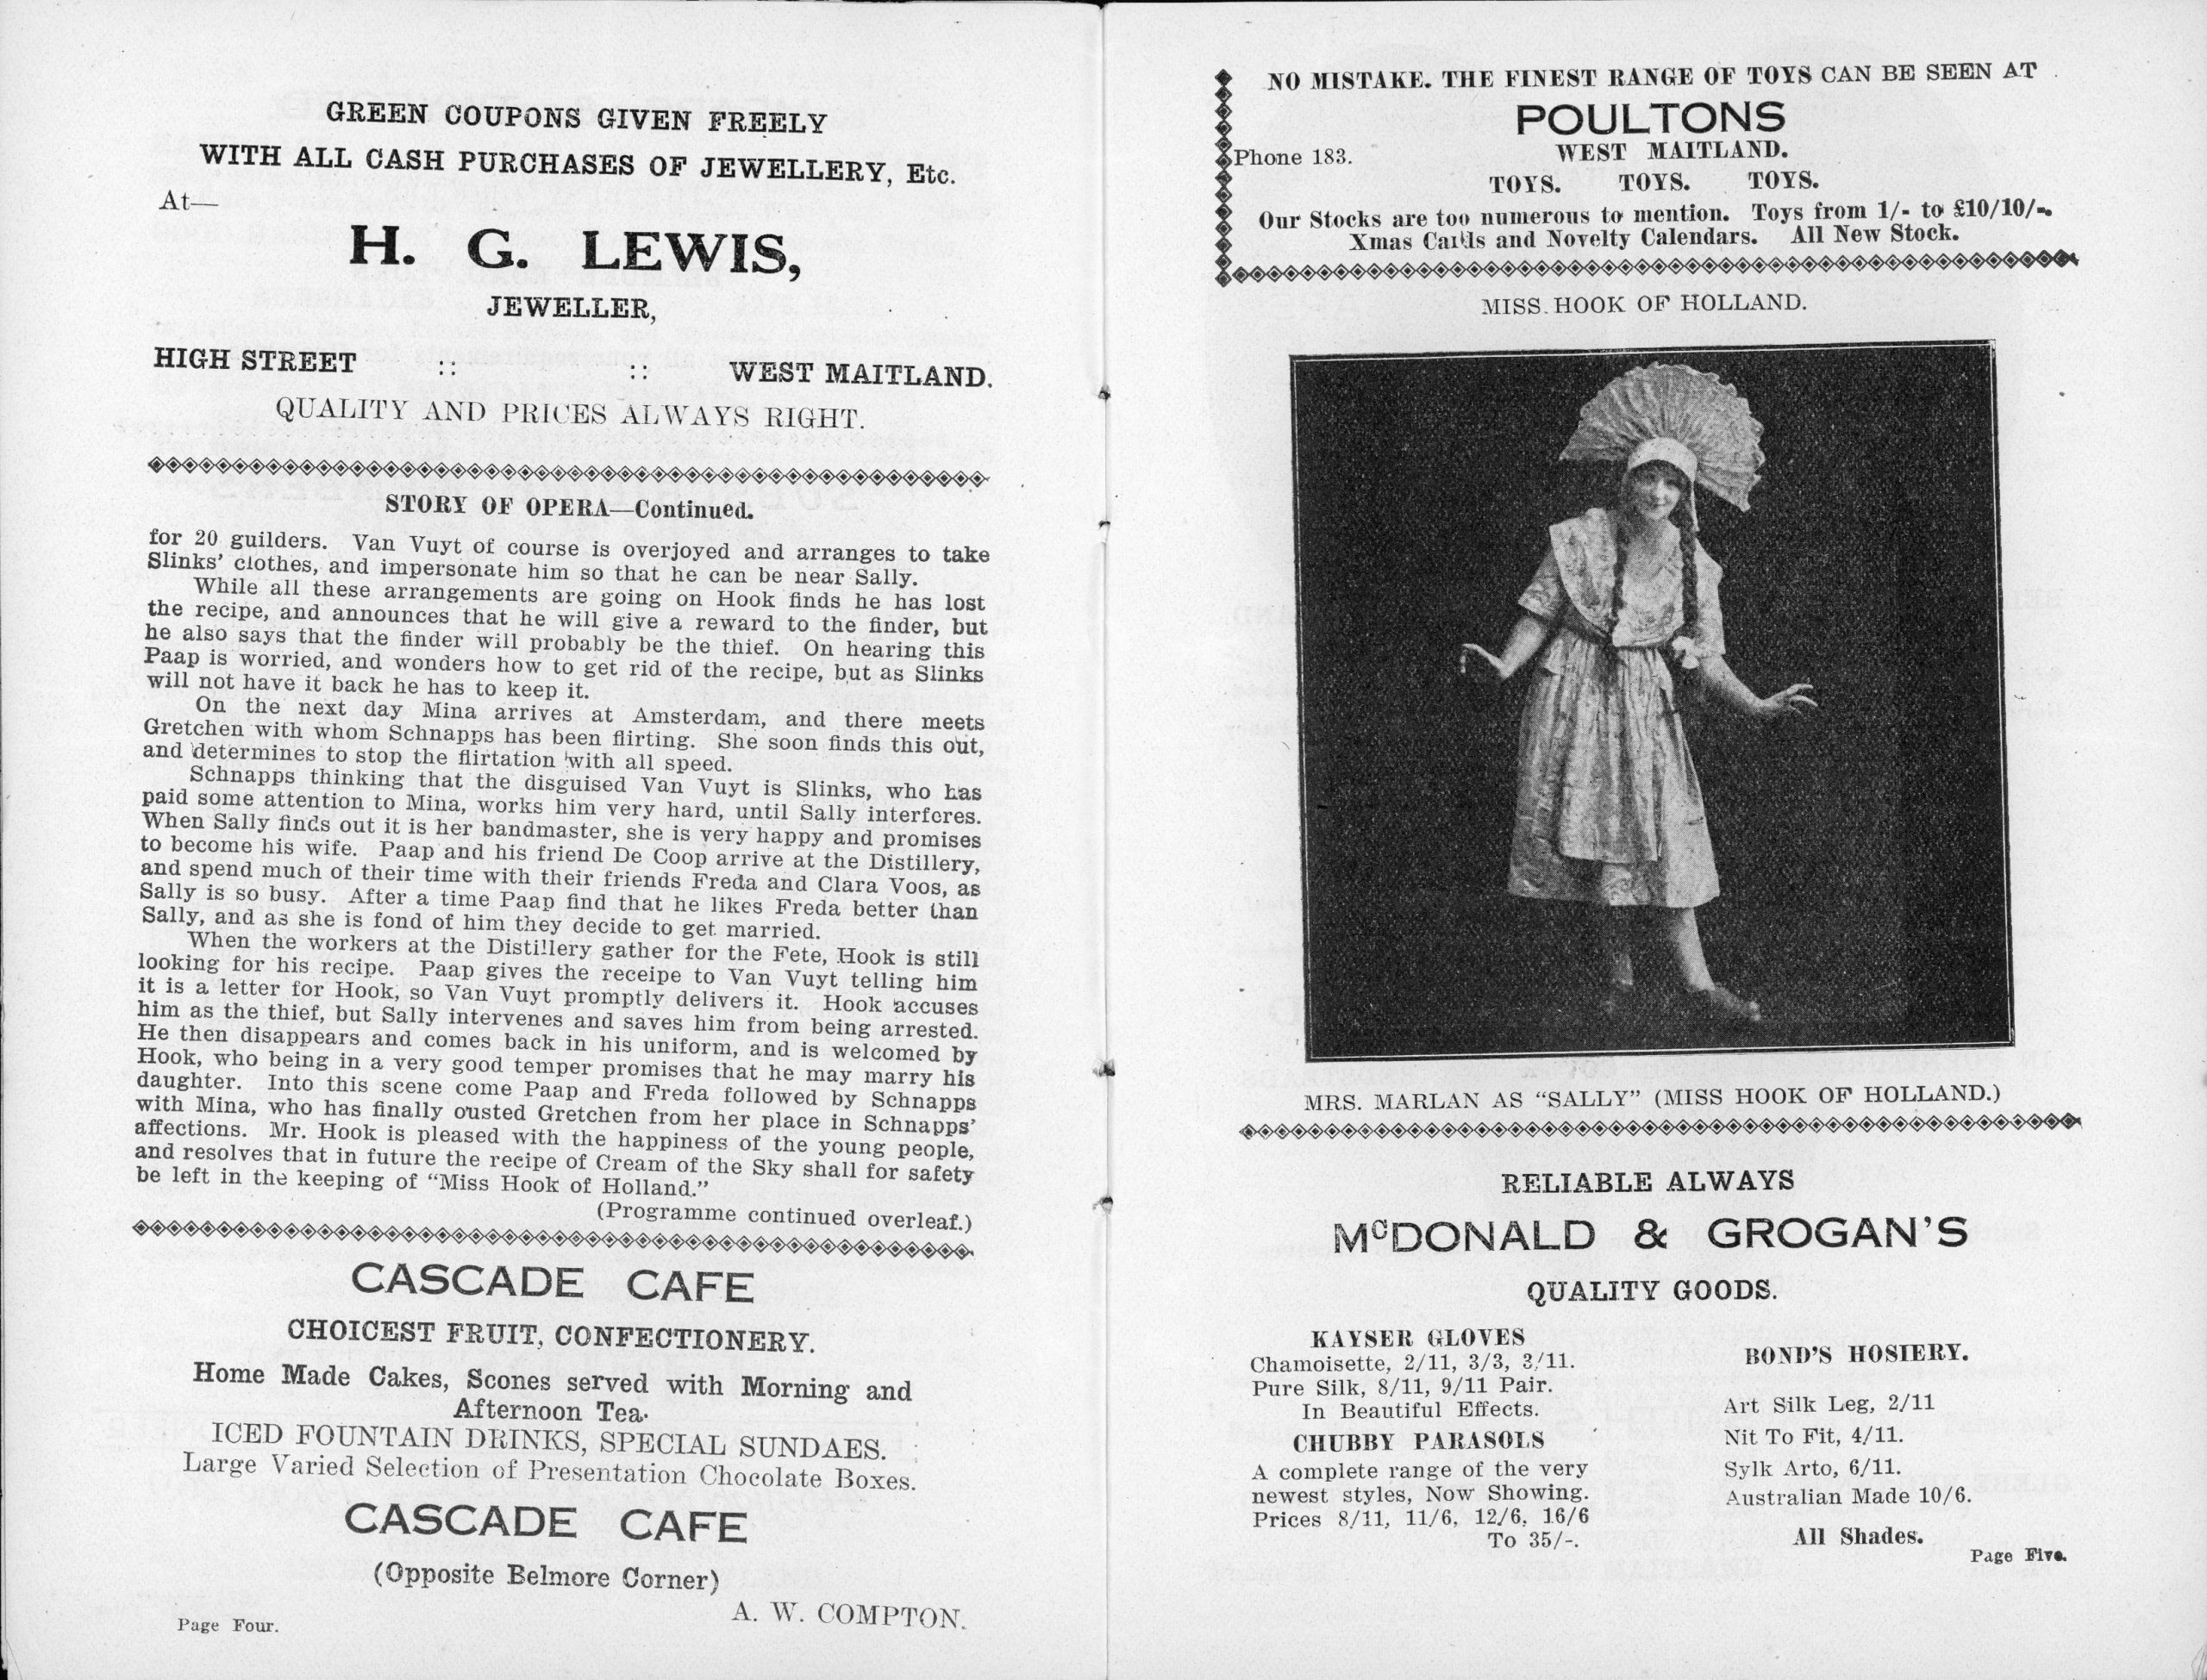 Page detailing the story of the opera alongside a photograph of Mrs Marlan as 'Sally,' the lead role. Her hair is in two long plaits emerging from a hat/bonnet which sits on her head and creates a lace fan on top of her head essentiall as wide as her shoulders. She wears a lacey dress and is in movement, as if soon to curtsy.